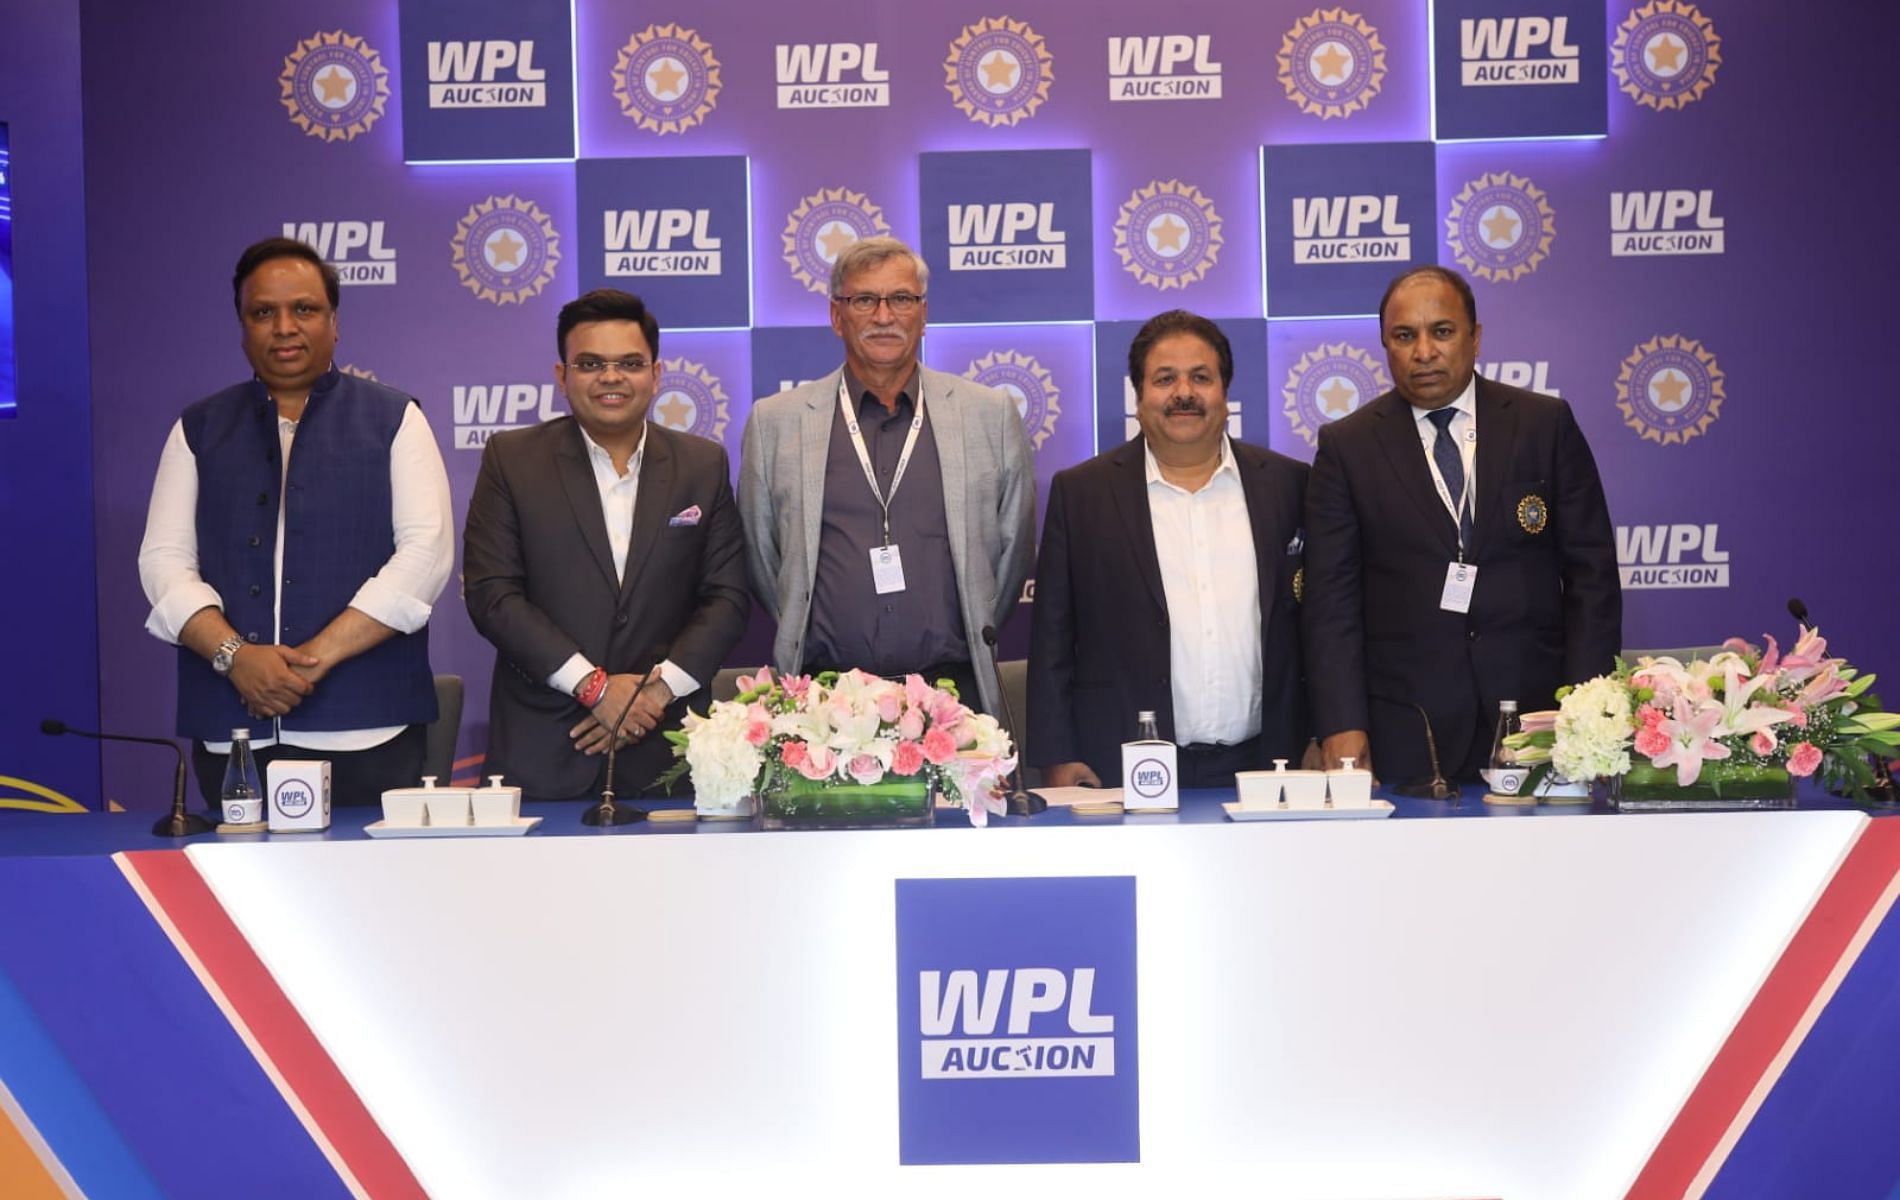 The WPL auction was conducted in Mumbai on Monday. (Pic: Twitter)